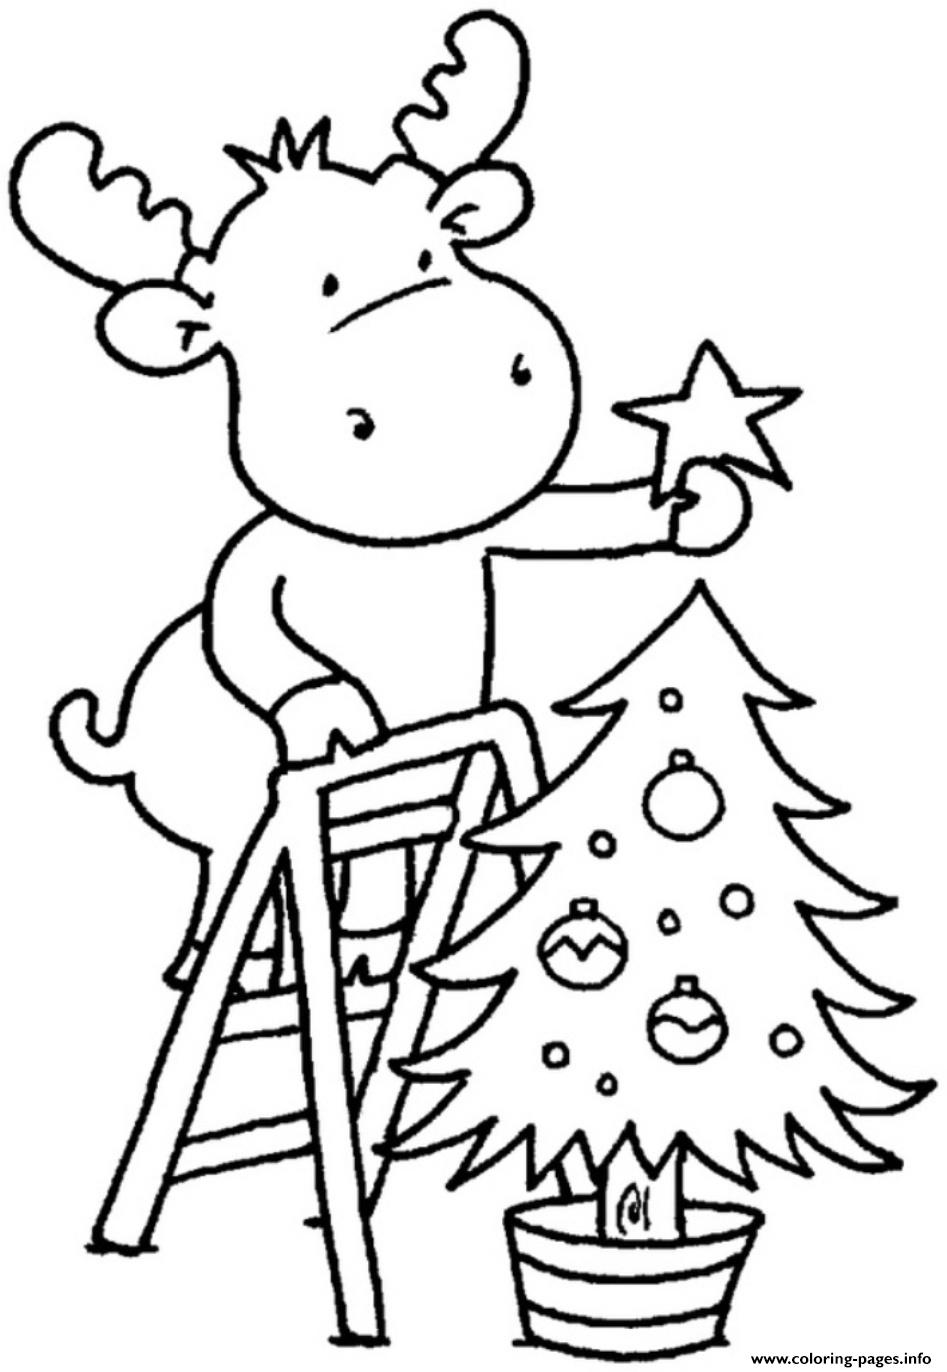 Children's Coloring Pages For Christmas